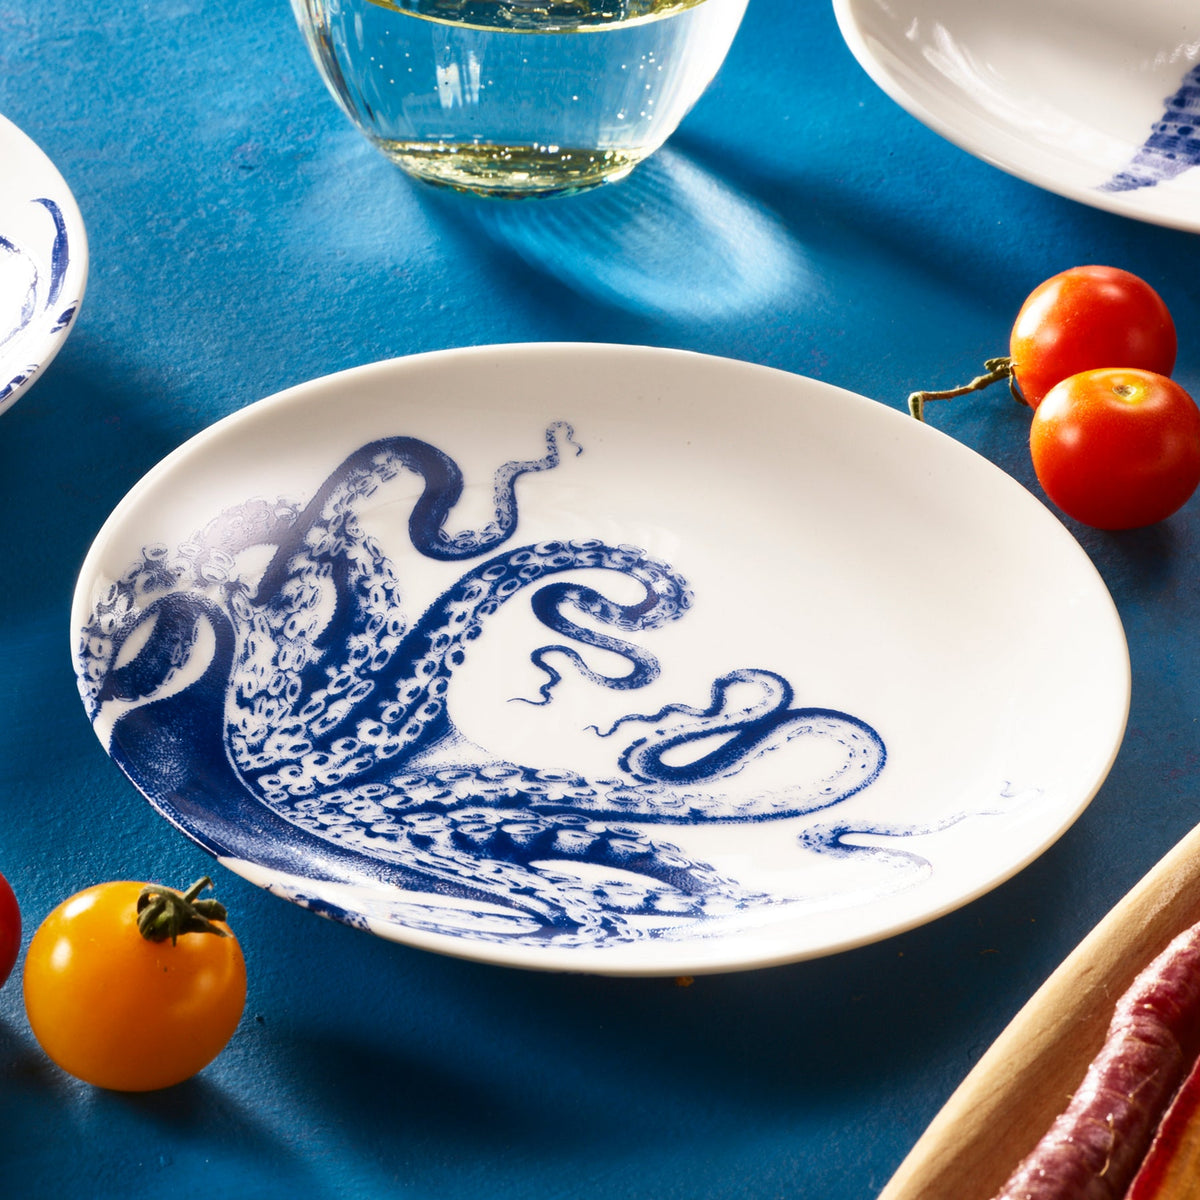 A white plate with an octopus pattern design, positioned on a blue surface with various small tomatoes and an out-of-focus glass in the background, showcases the style of Lucy Small Plates from Caskata Artisanal Home.